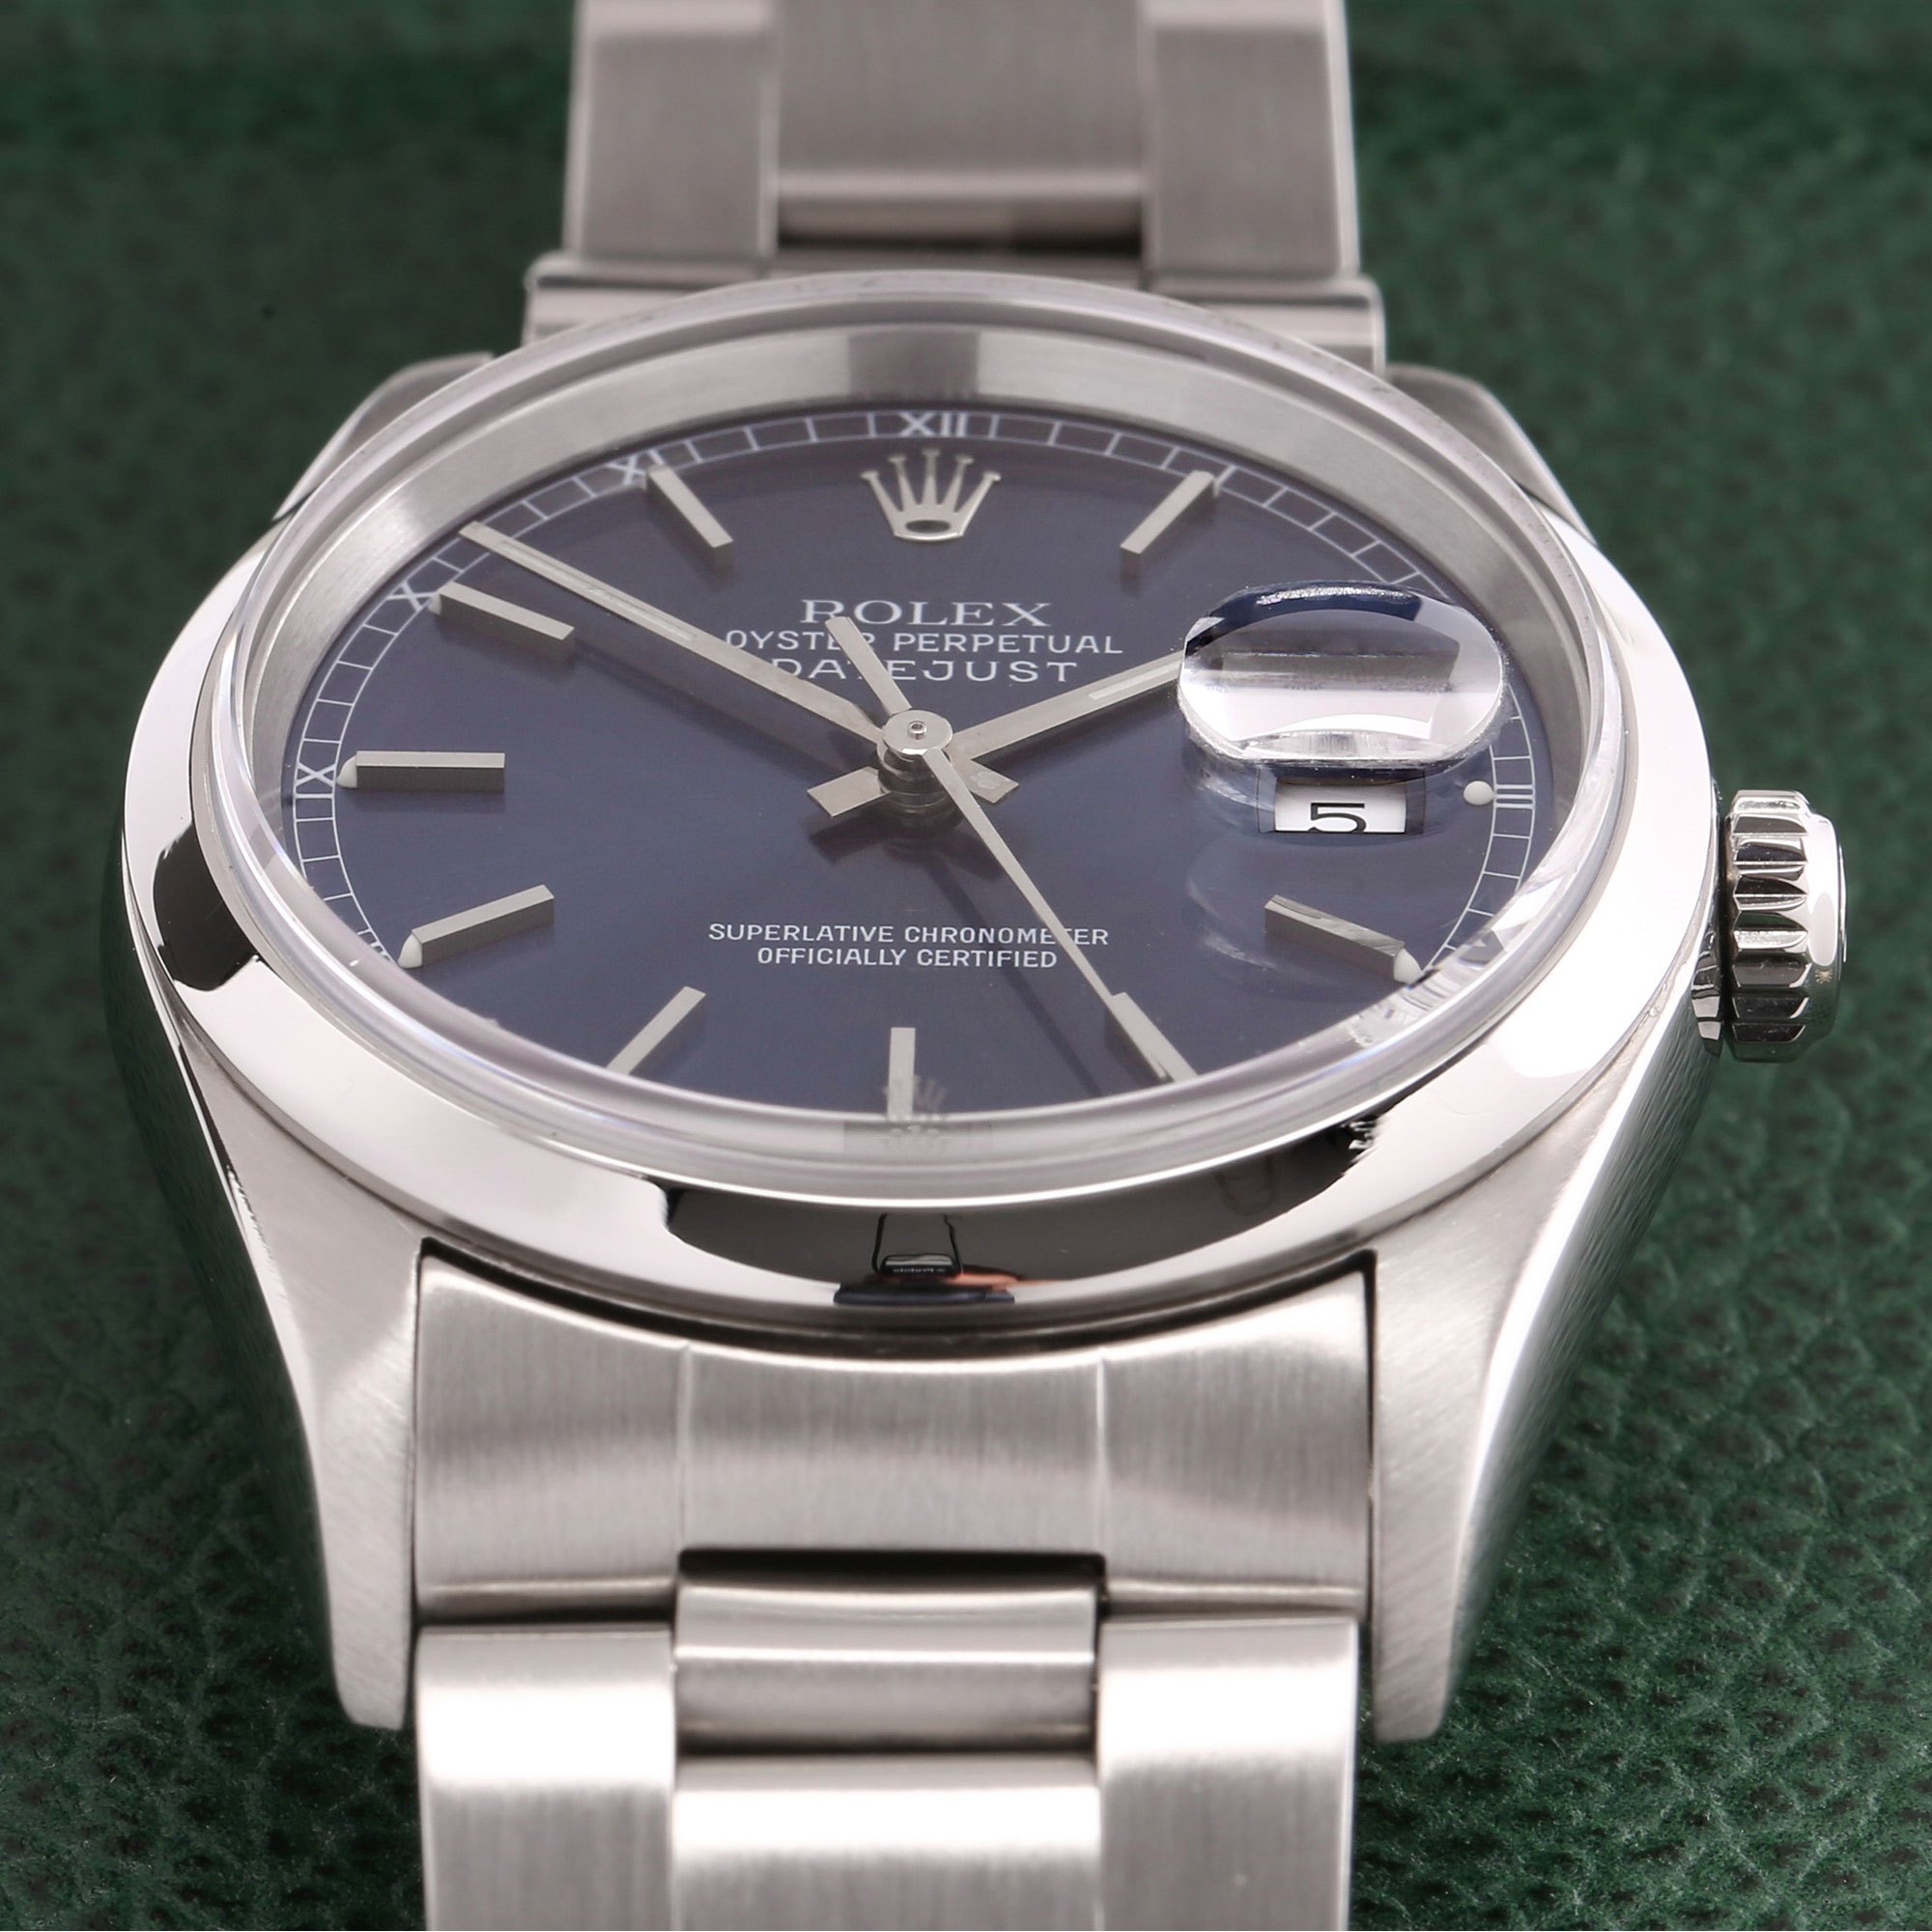 Rolex Datejust 36 16200 Men Stainless Steel Watch - Image 3 of 10